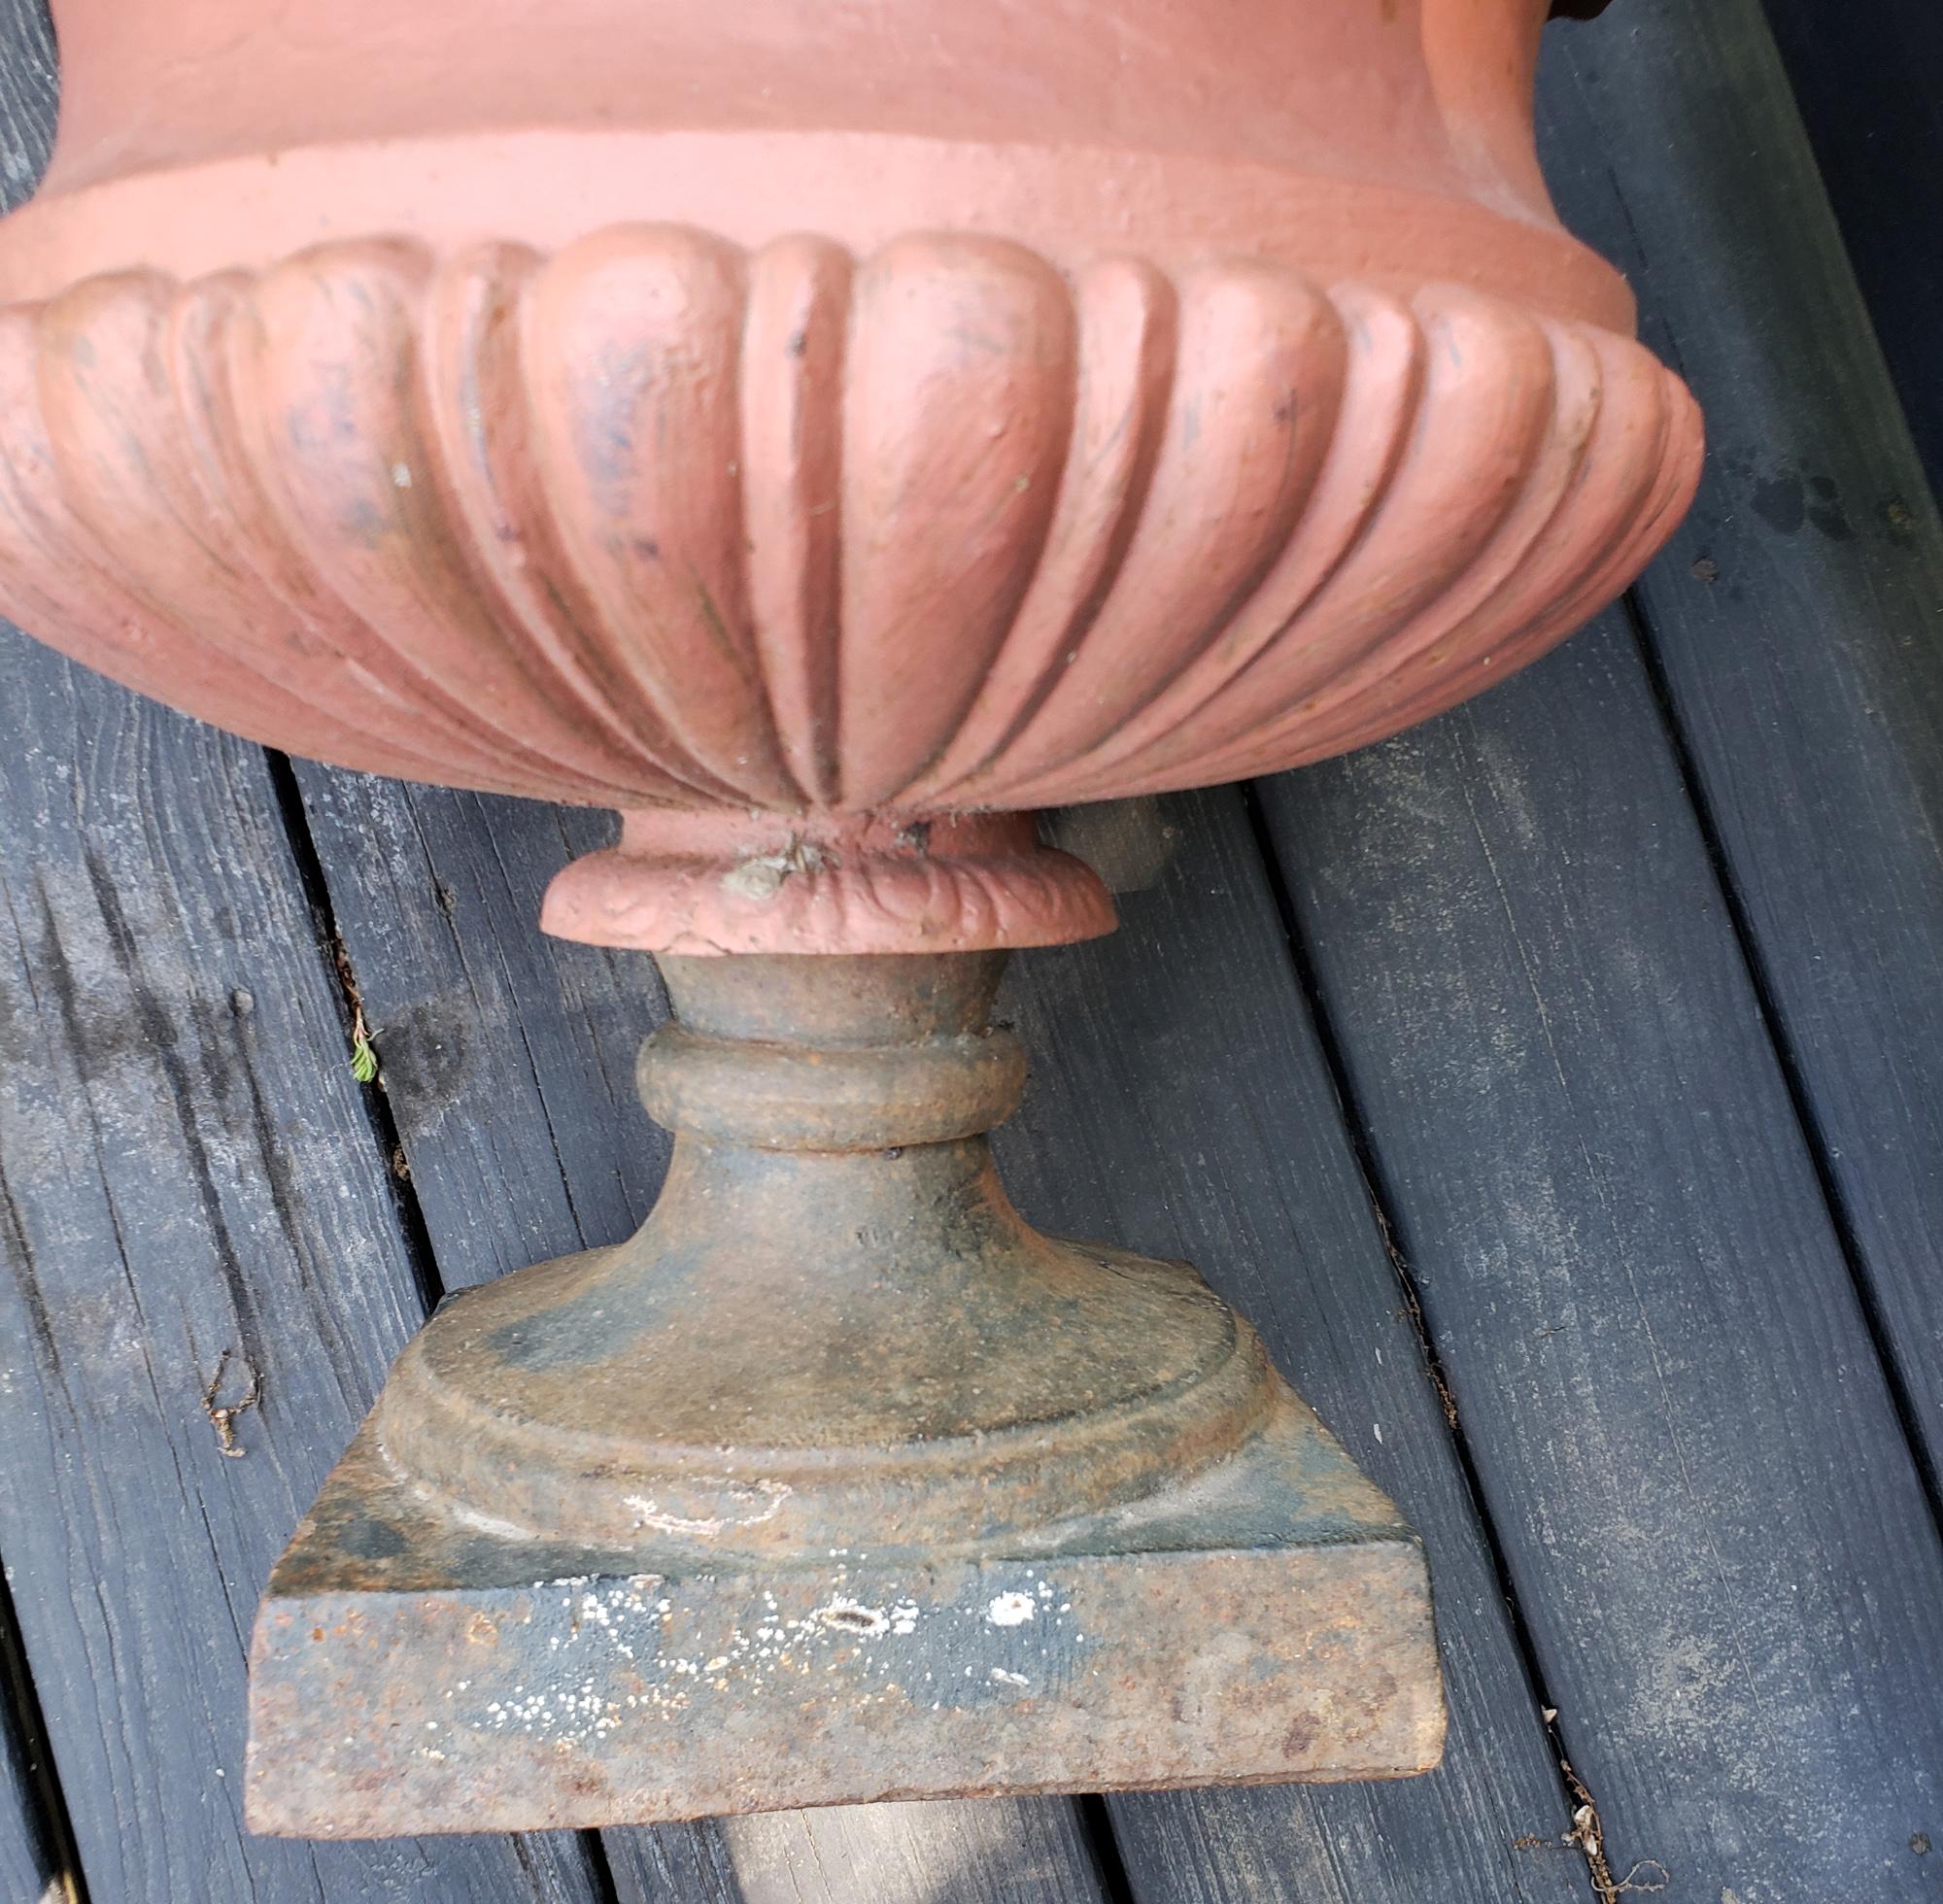 Time for planting.

American cast iron garden urns, Set of four, circa 1900

The American painted cast iron set of garden urns are painted with a blue and the body with an ochre body. The urns have a square pedestal foot with a circular